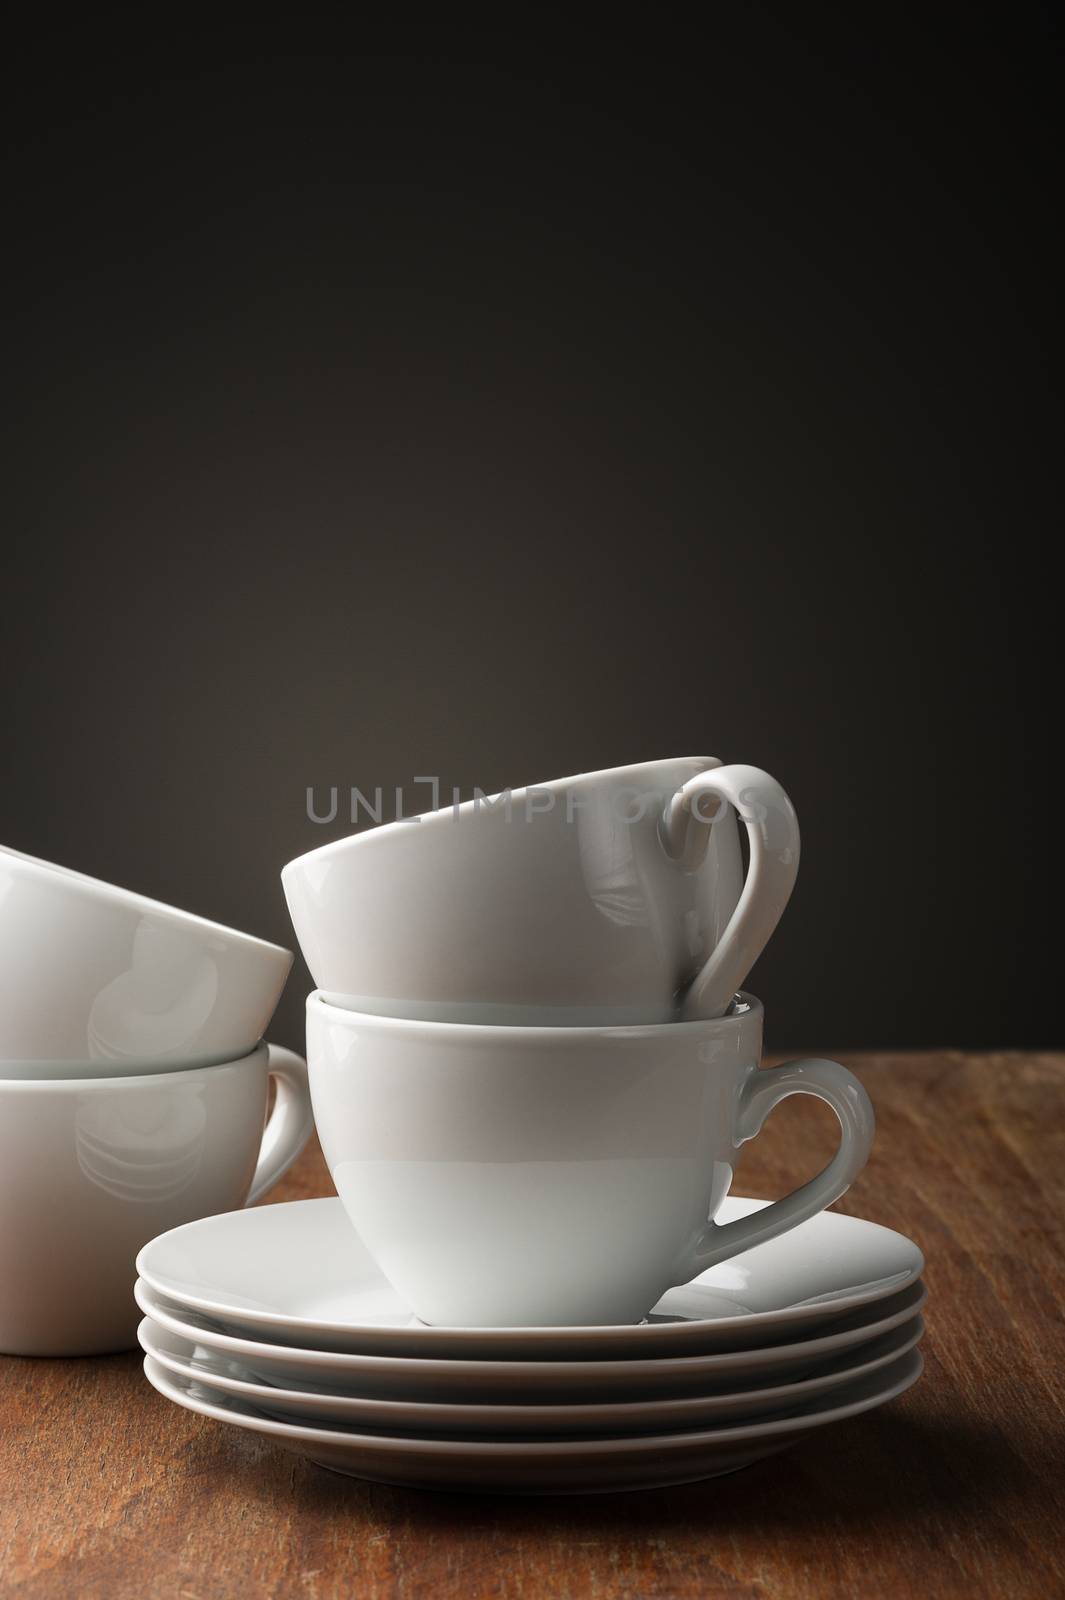 Two plain white pottery tea or coffee cups with stacked saucers standing ready on a wooden table to serve a relaxing cup of hot beverage, with vertical copyspace